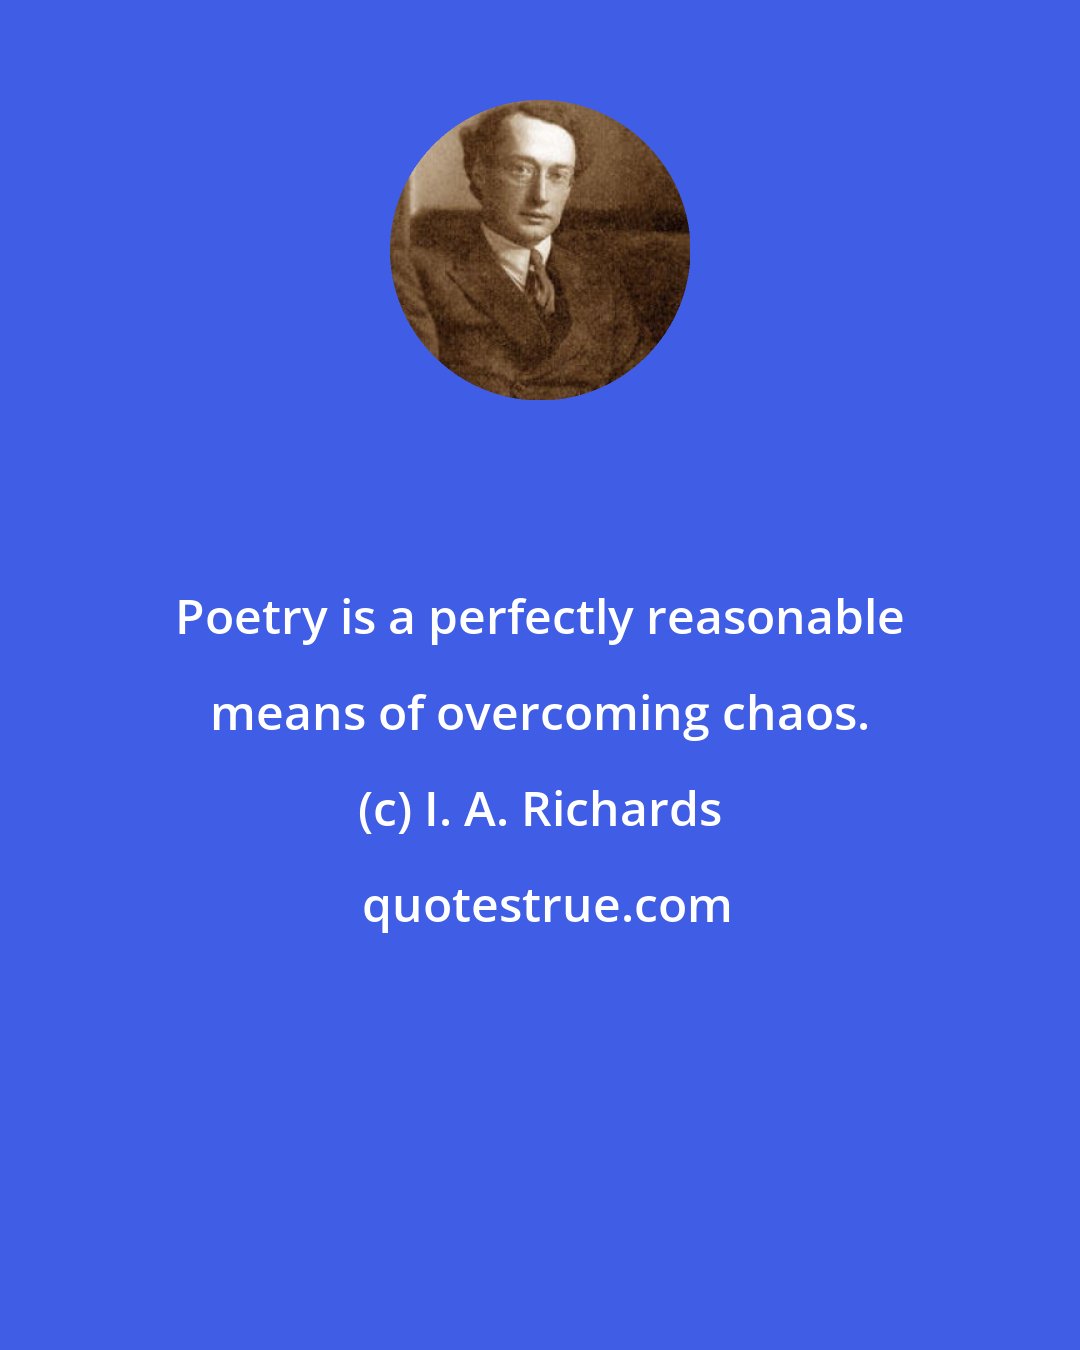 I. A. Richards: Poetry is a perfectly reasonable means of overcoming chaos.